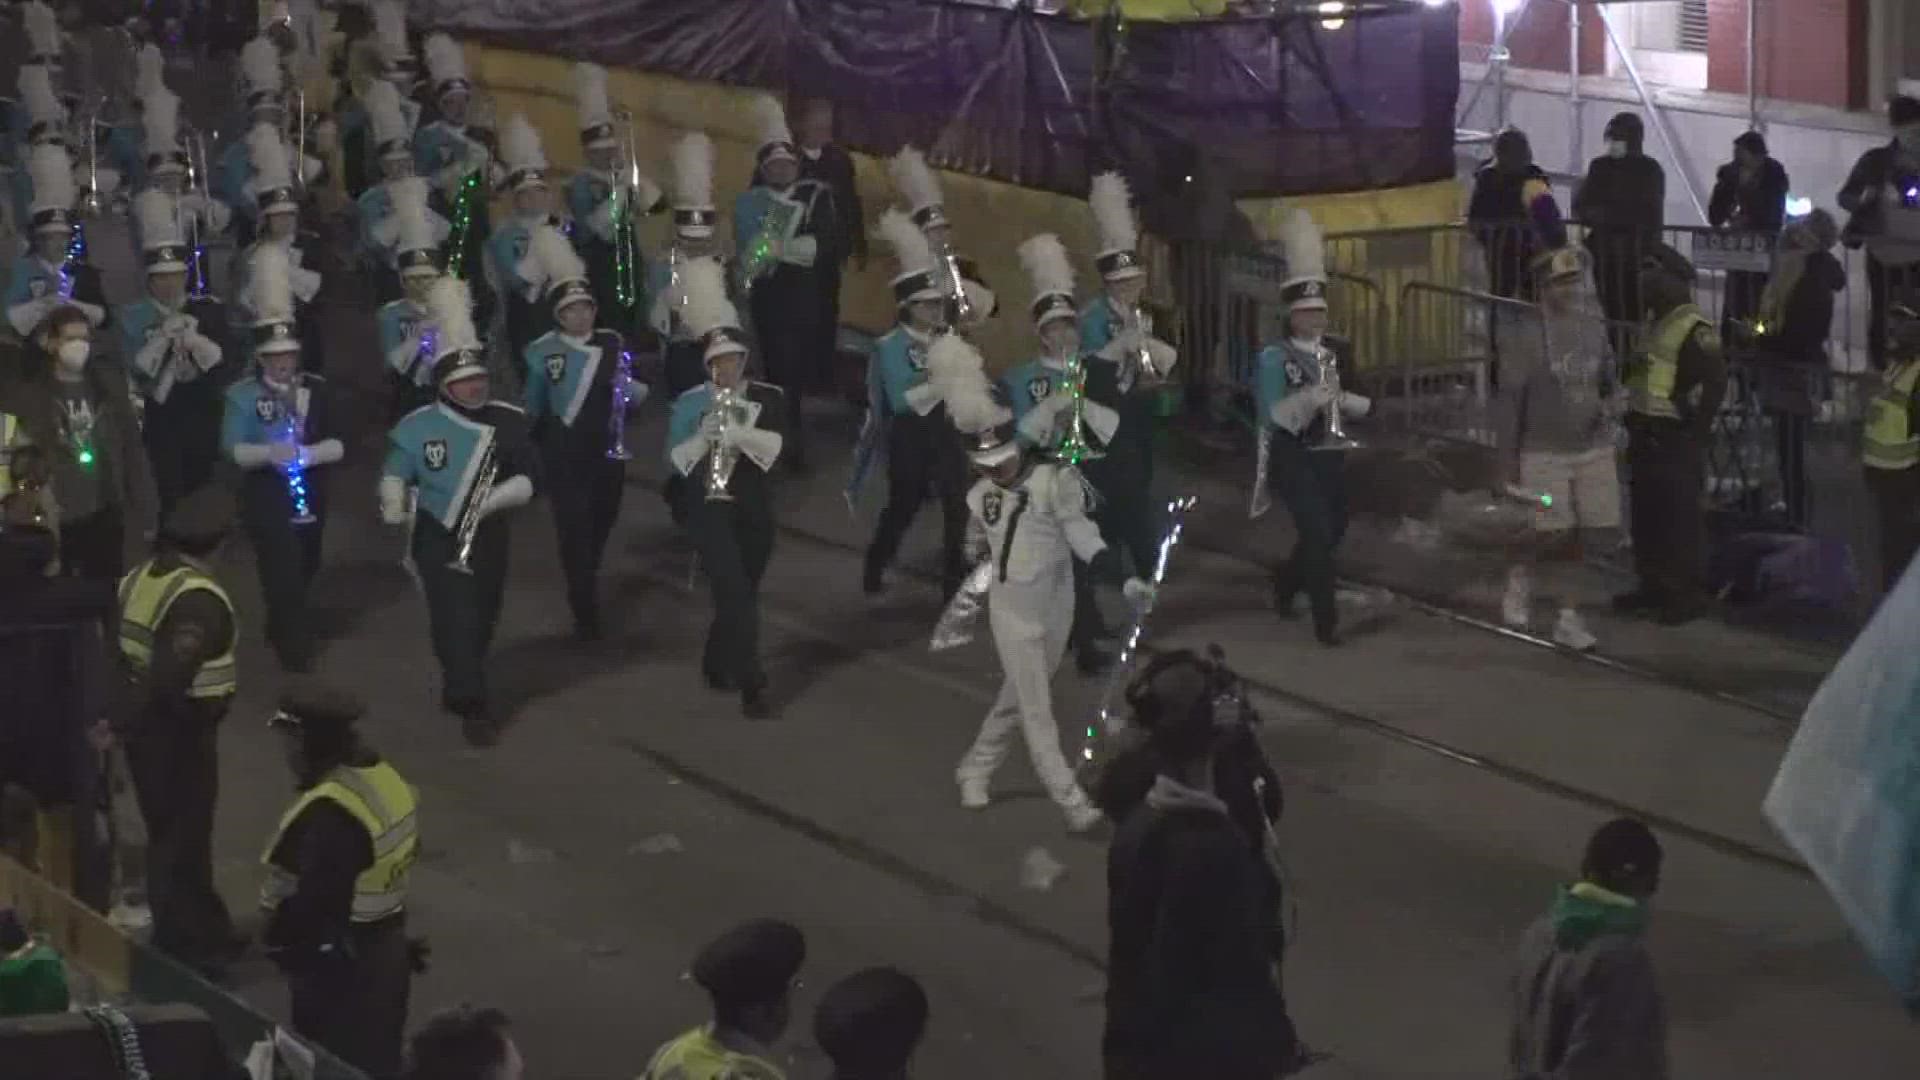 Tulane's Marching Band made the city proud as they played Iko Iko in the Krewe D'Etat parade.